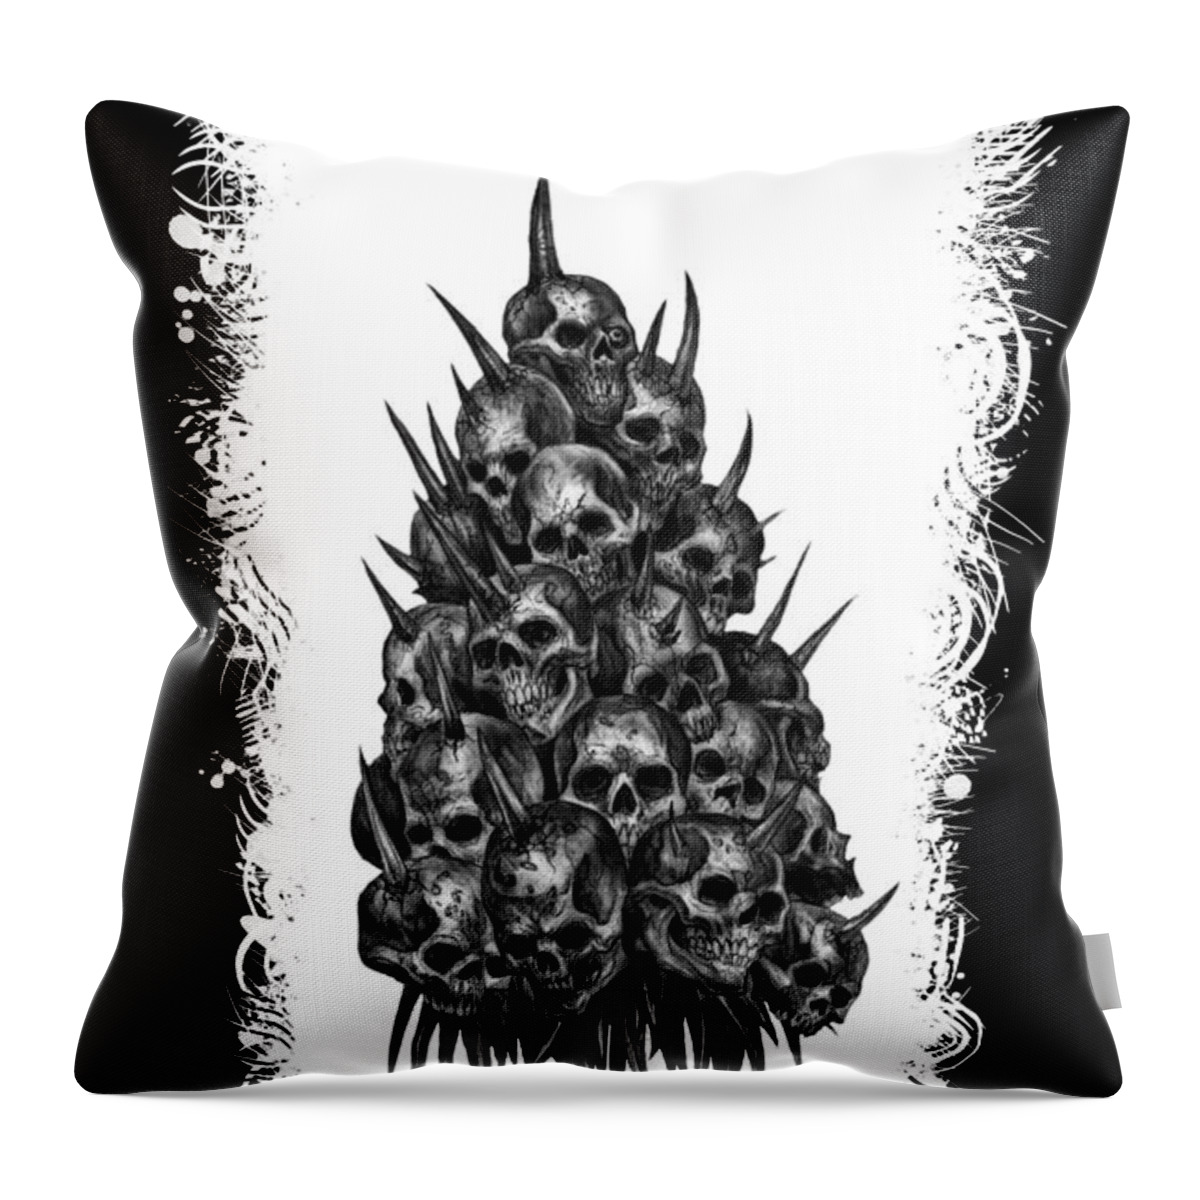 Sketch The Soul Throw Pillow featuring the mixed media Pile of Skulls by Tony Koehl